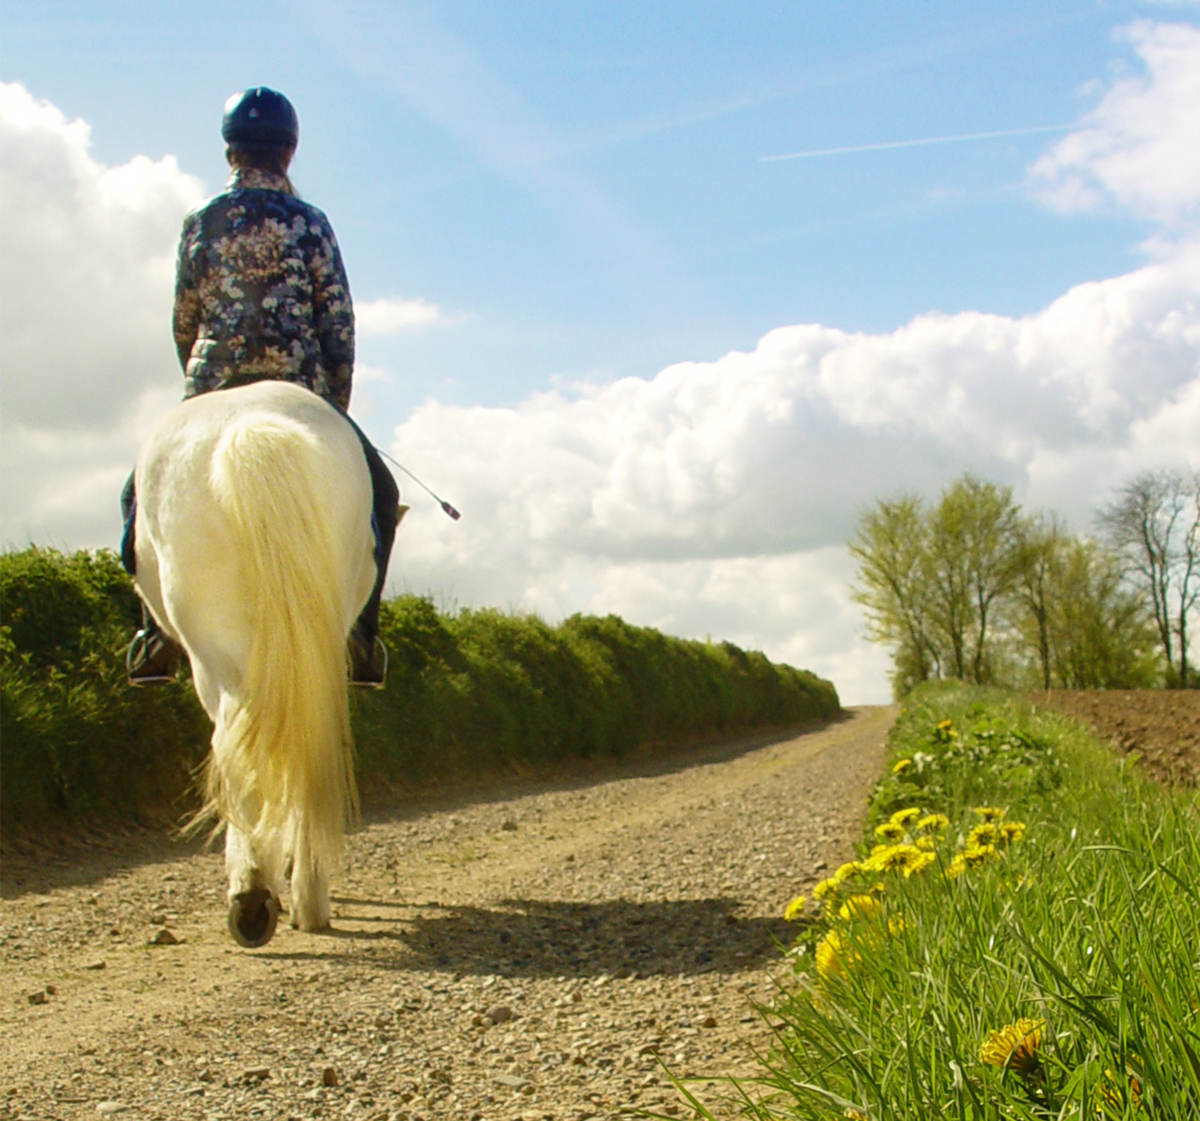 A horse and rider trotting down a country road on a sunny day